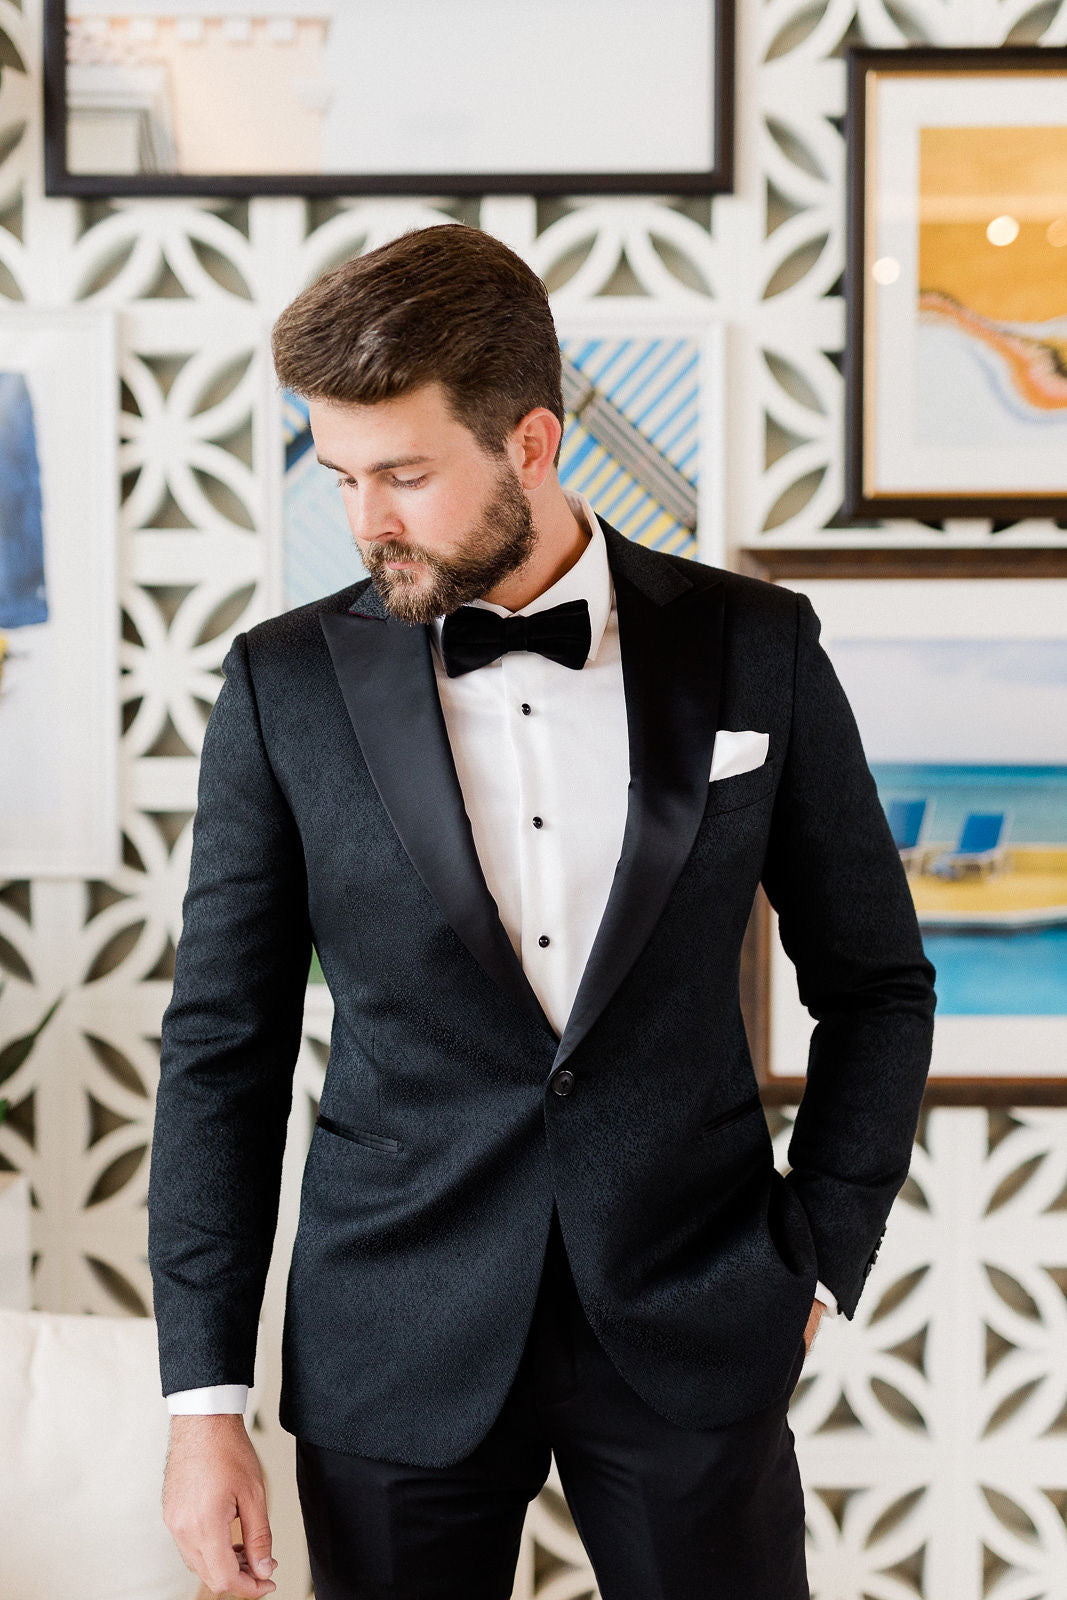 Black Tuxedo Jacket | Suits for Weddings & Events